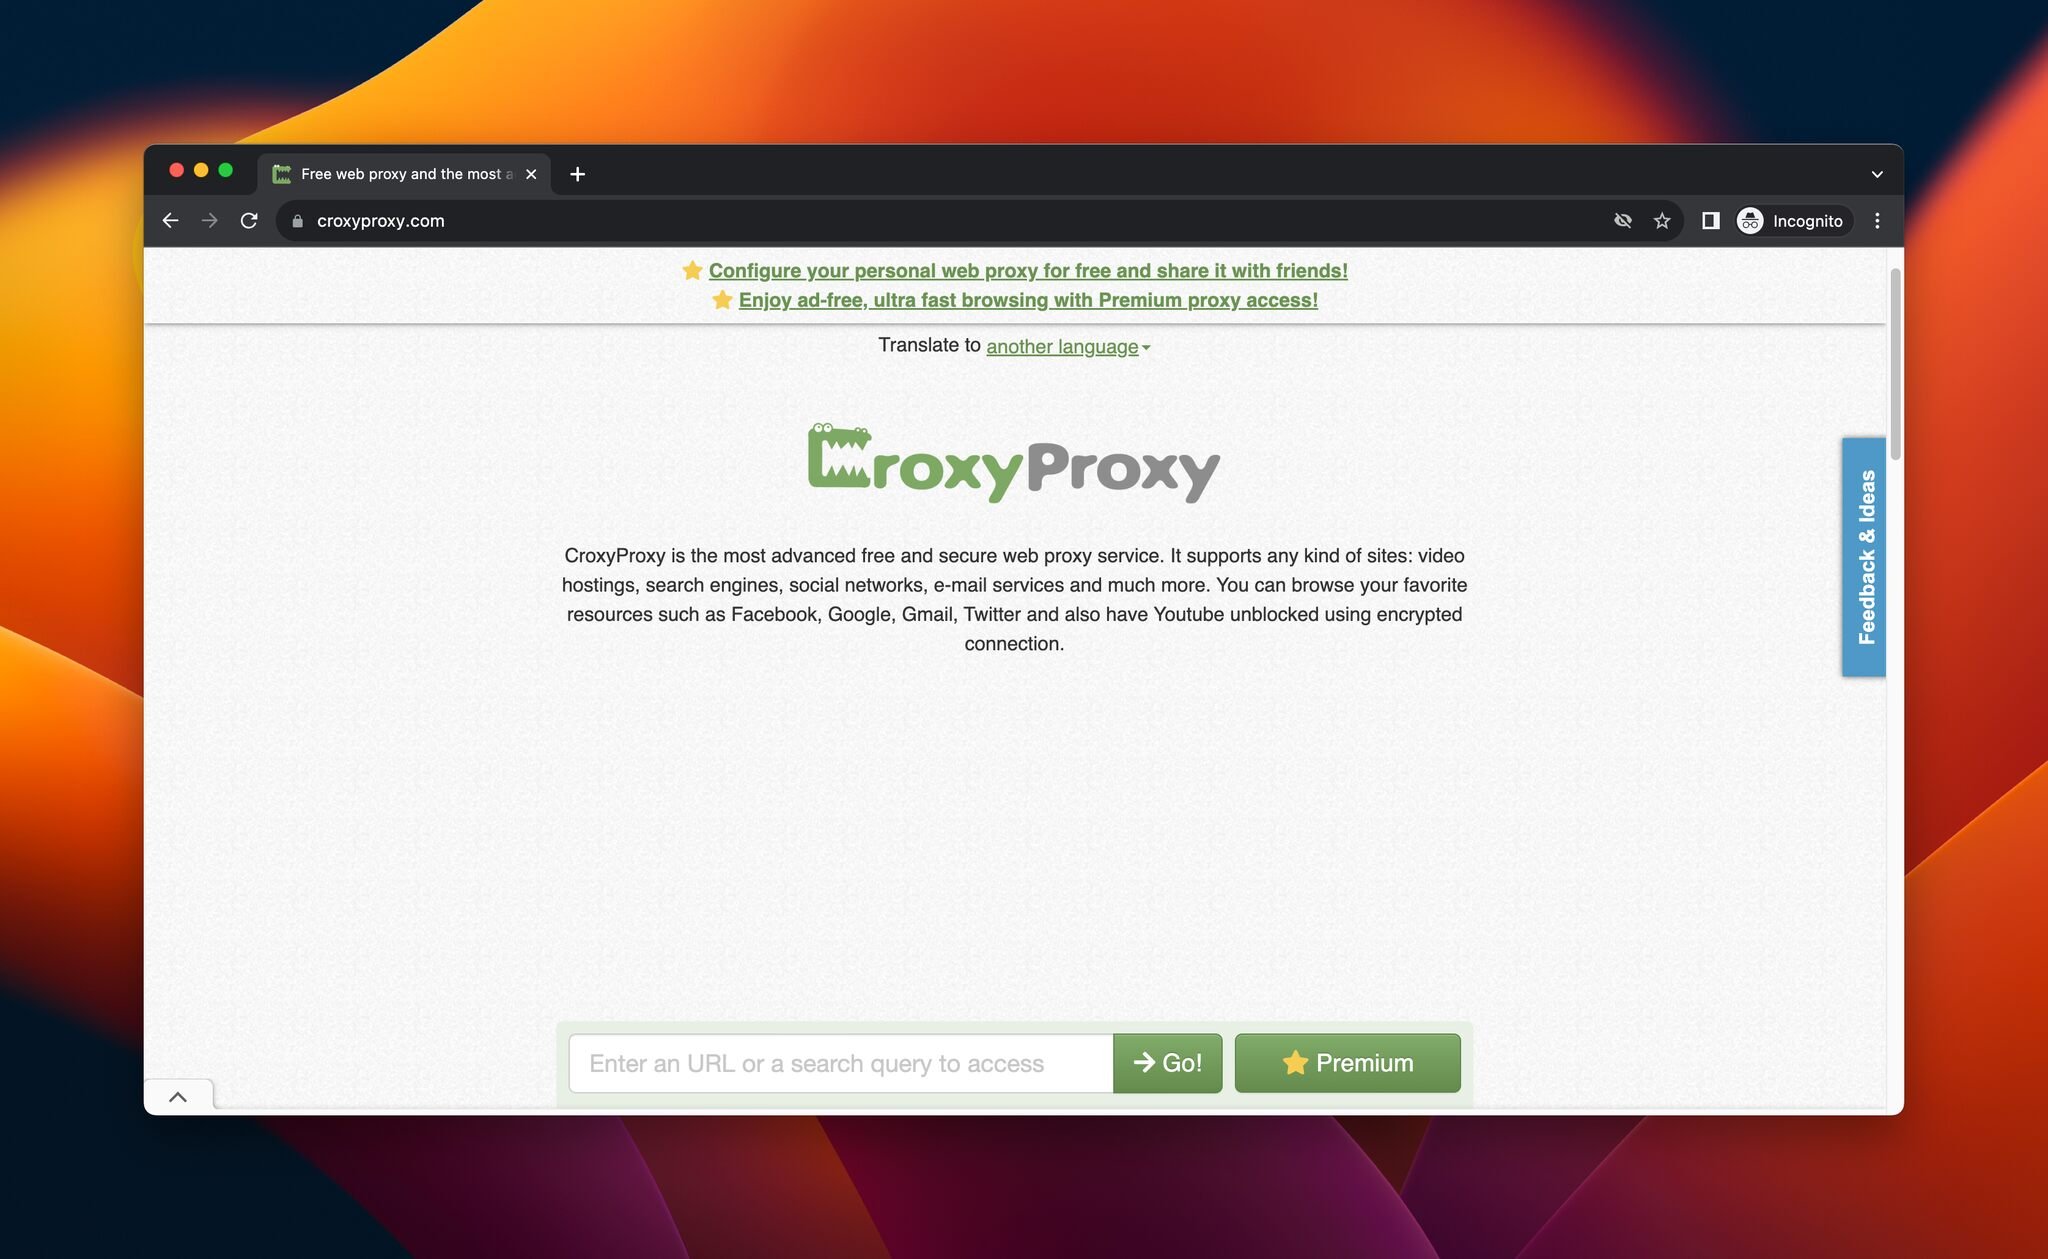 A screenshot of the homepage of CroxyProxy, which is a free web proxy